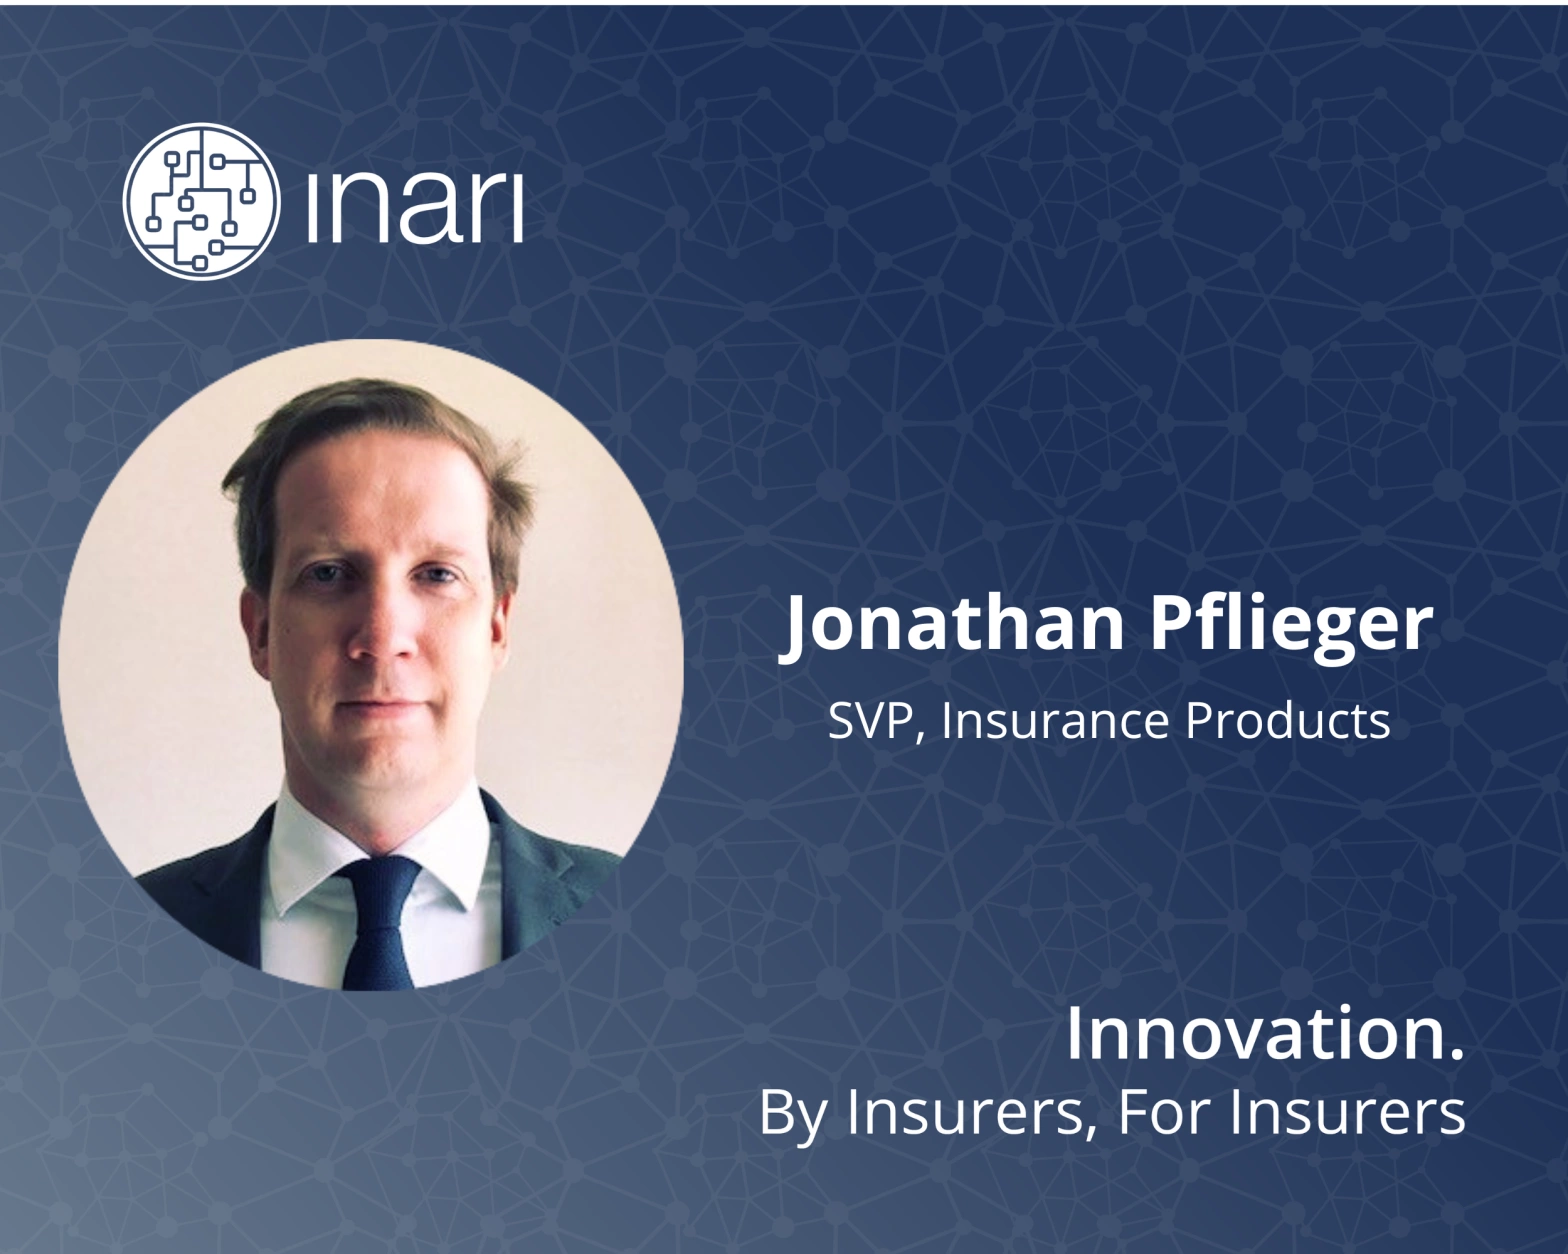 Inari Hires Underwriting Specialist to build out Insurance Product Offering